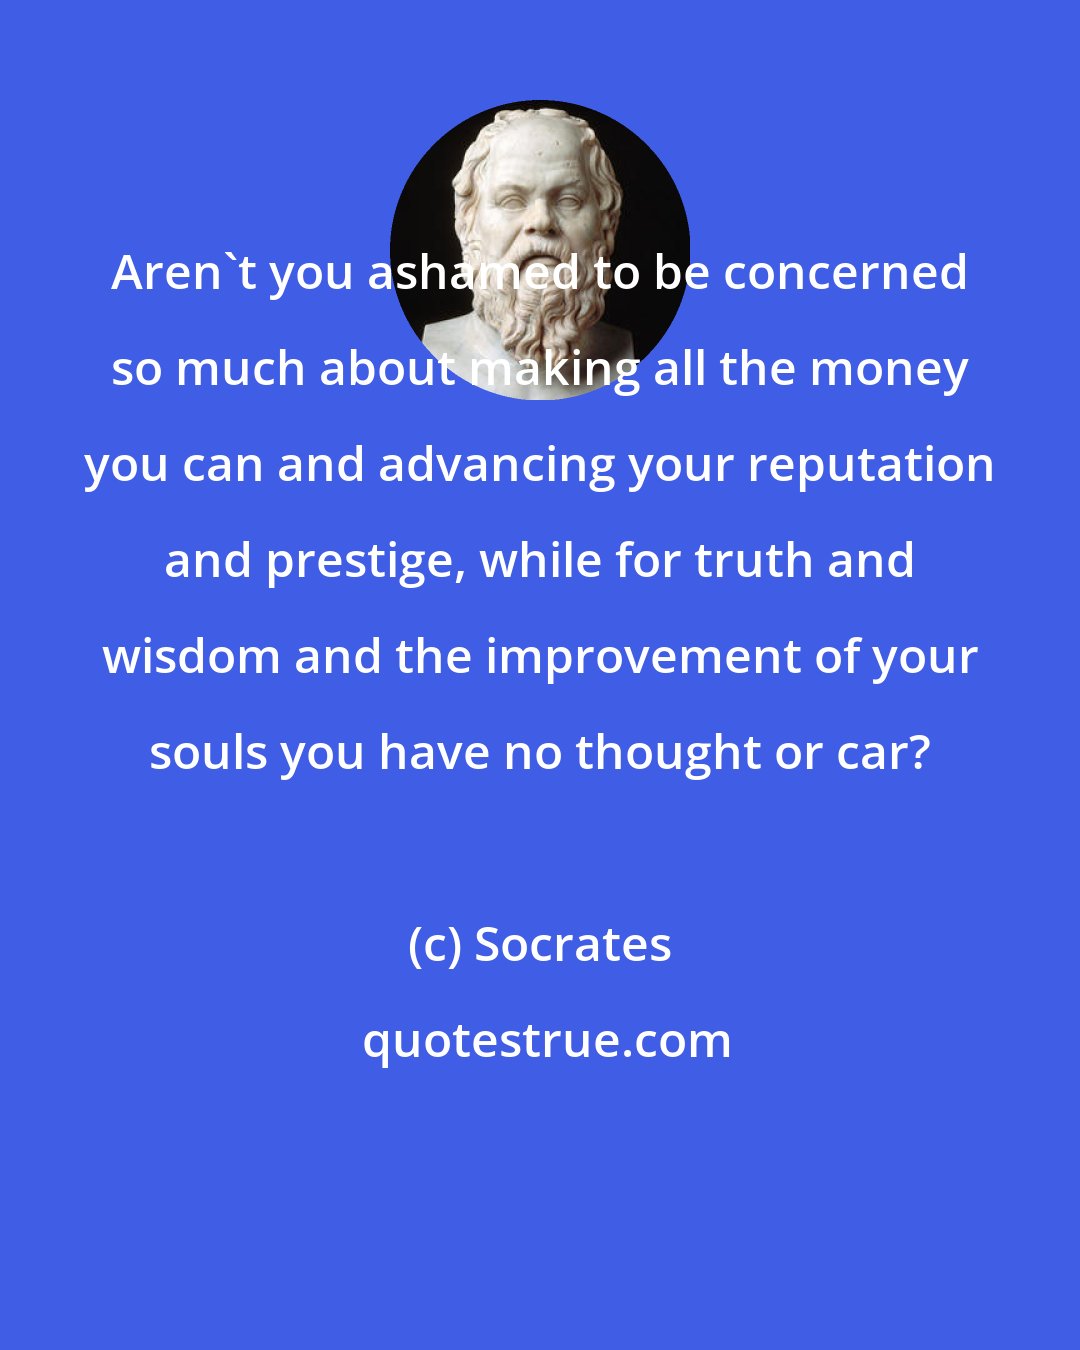 Socrates: Aren't you ashamed to be concerned so much about making all the money you can and advancing your reputation and prestige, while for truth and wisdom and the improvement of your souls you have no thought or car?